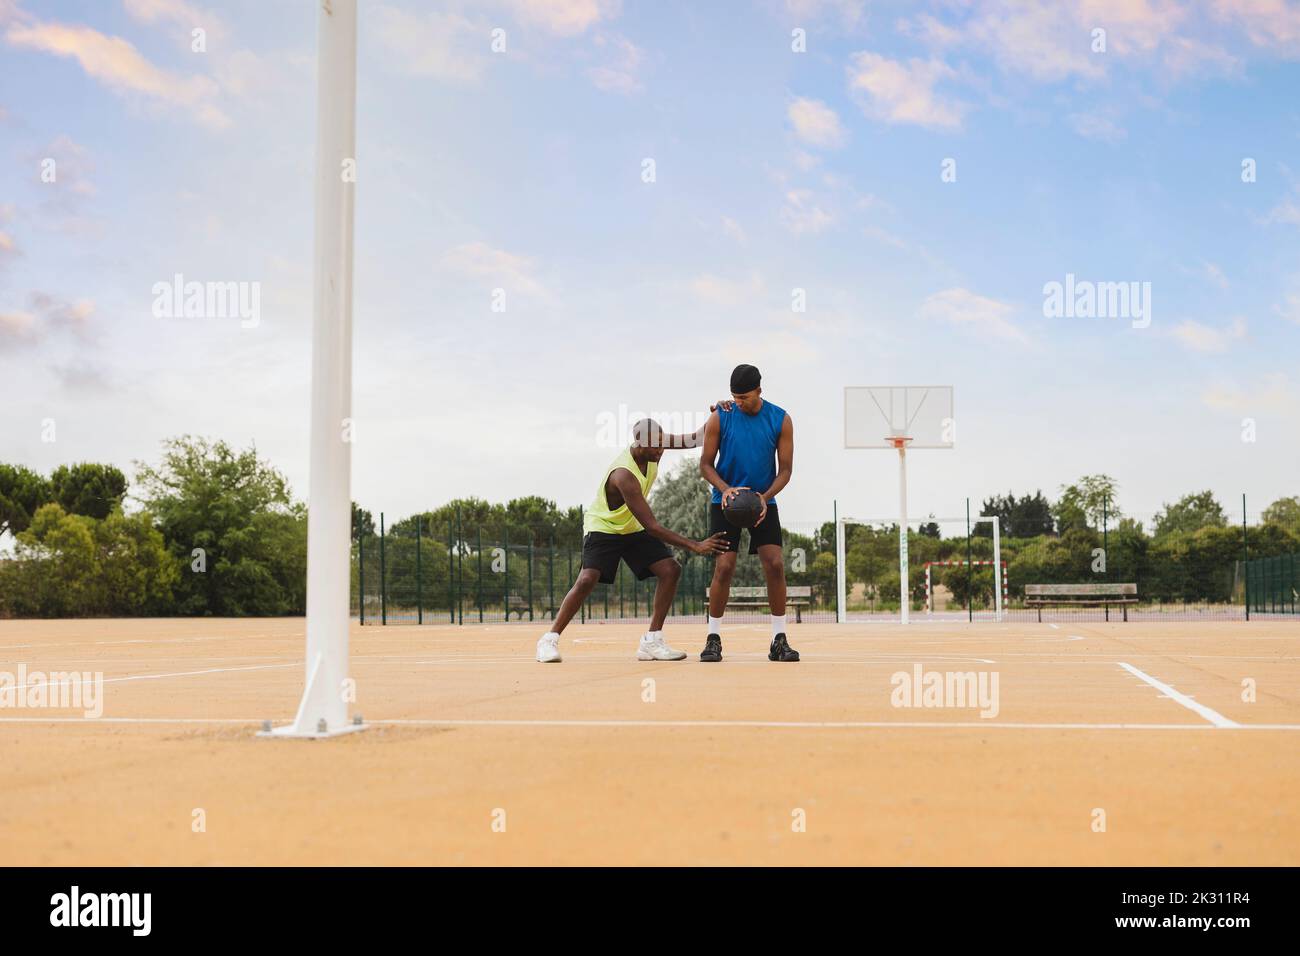 Father teaching basketball skills to son at sports court Stock Photo